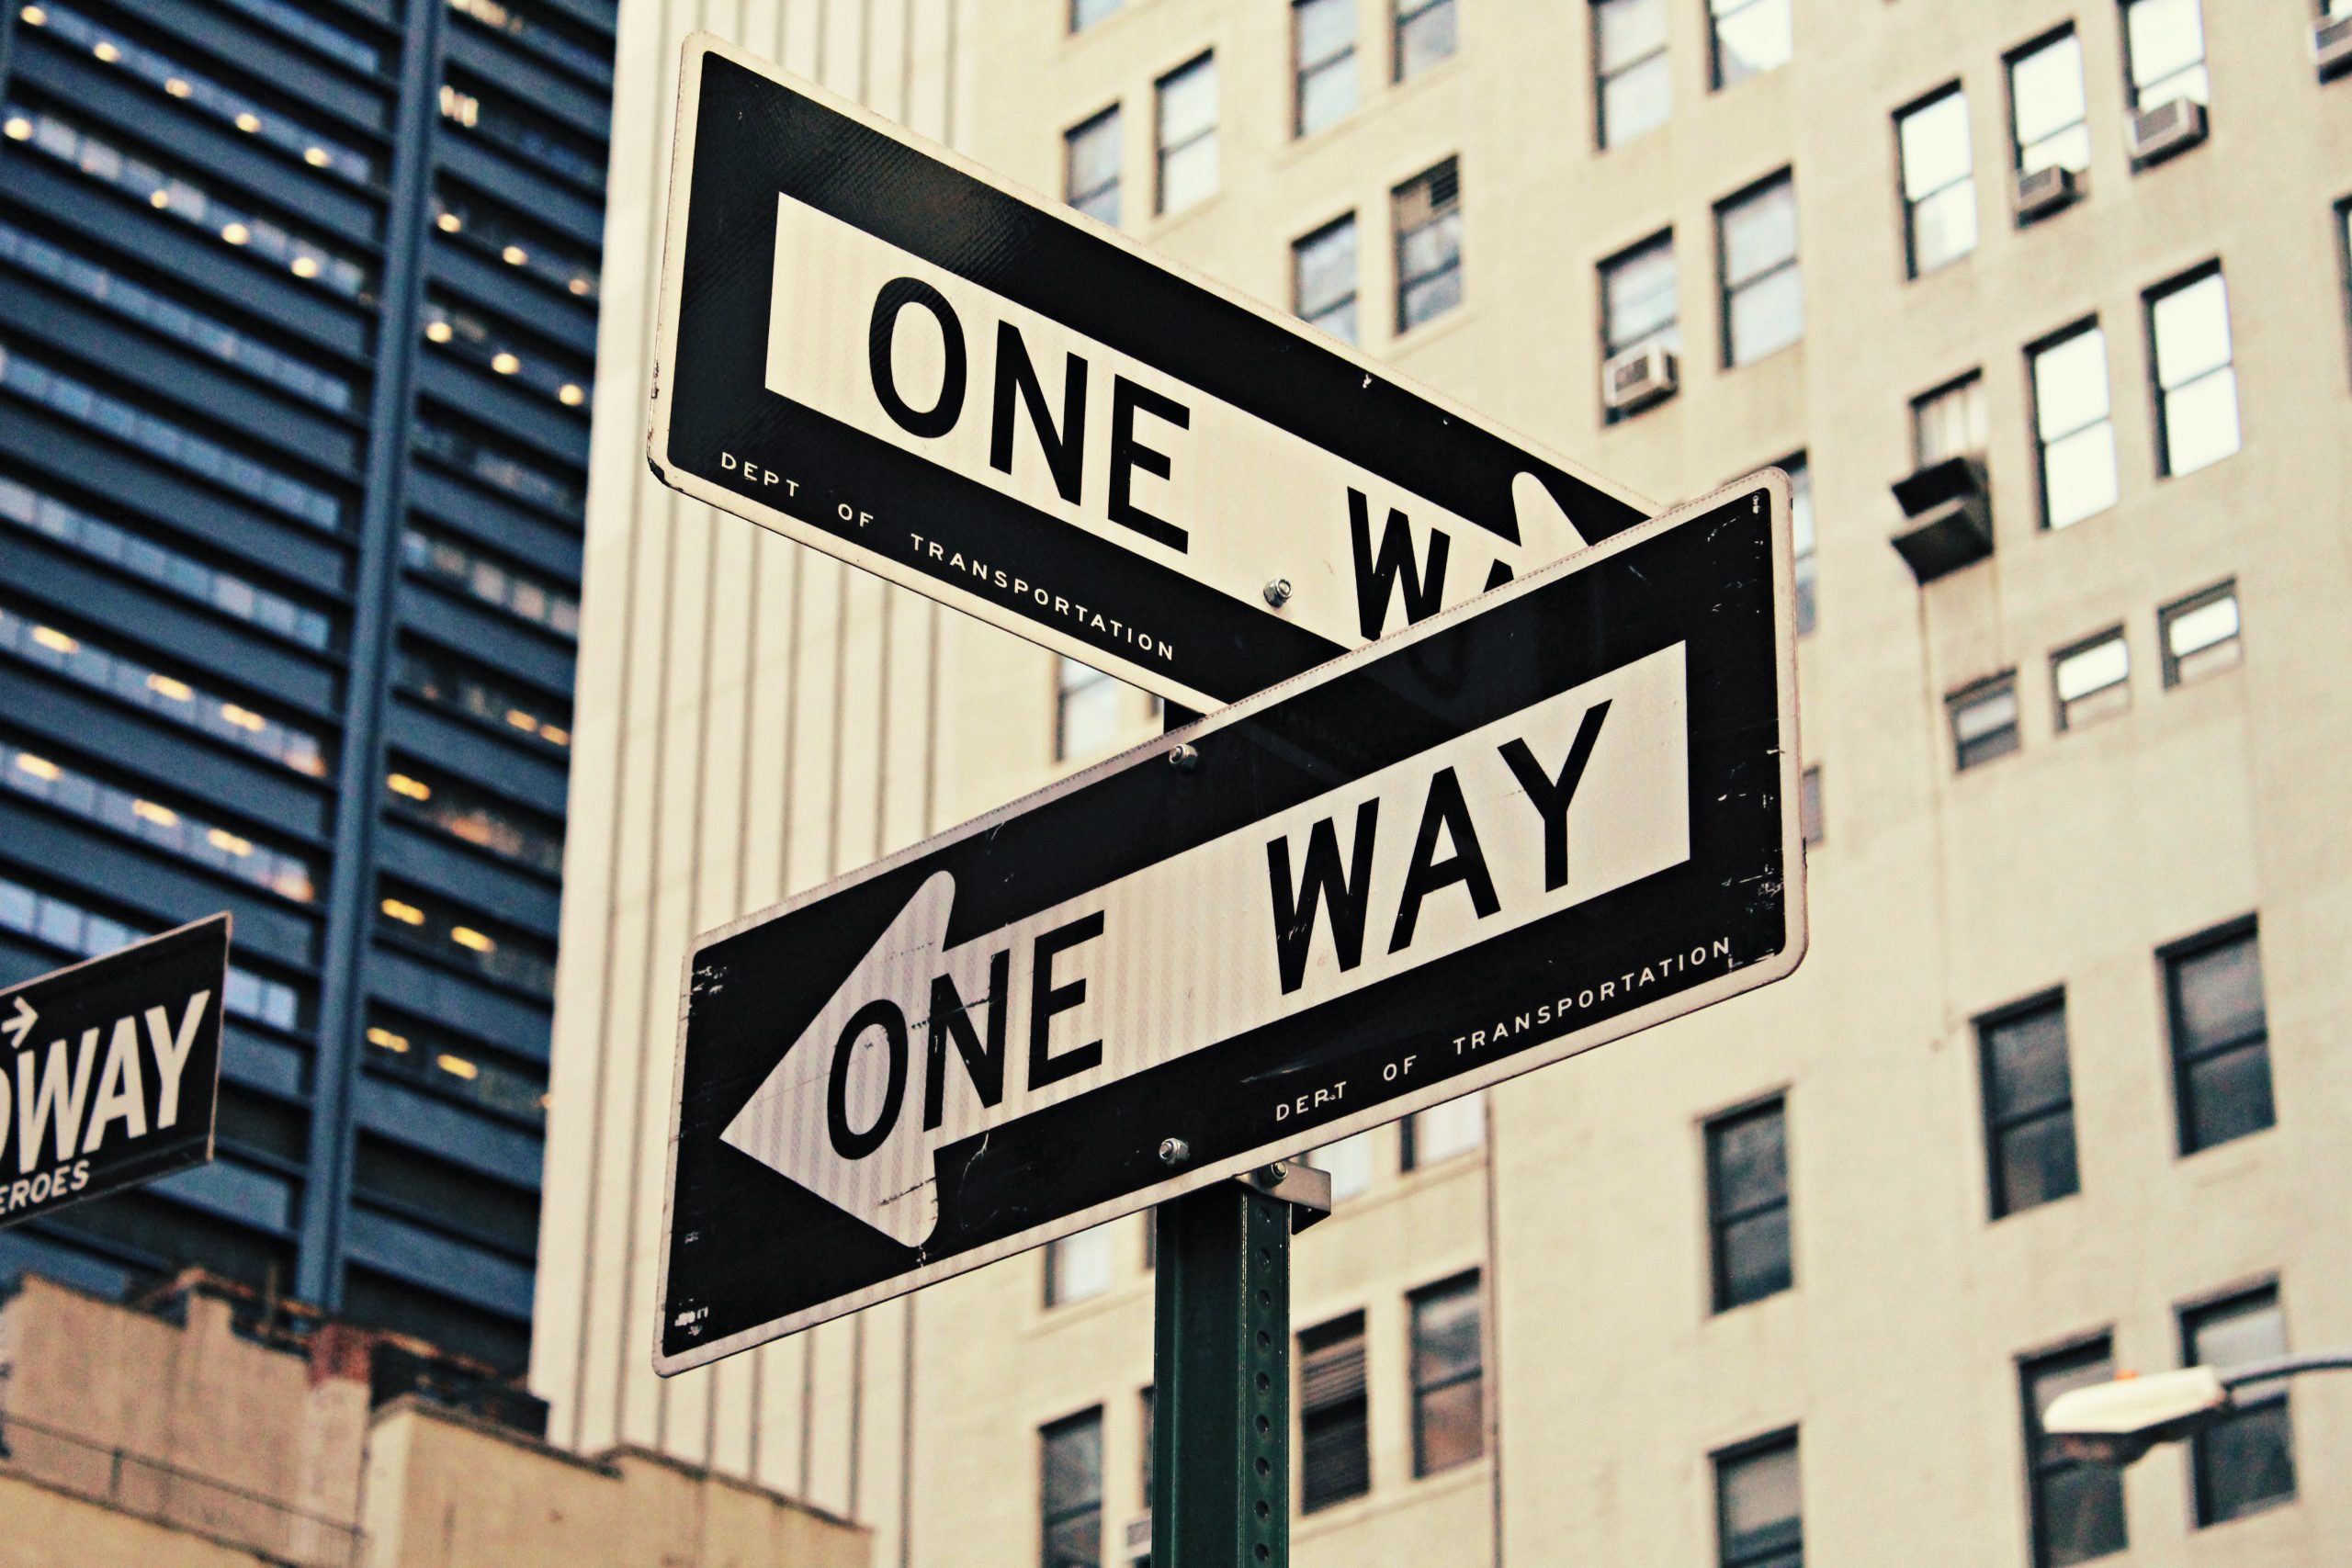 Conflicting street signs saying "one way"